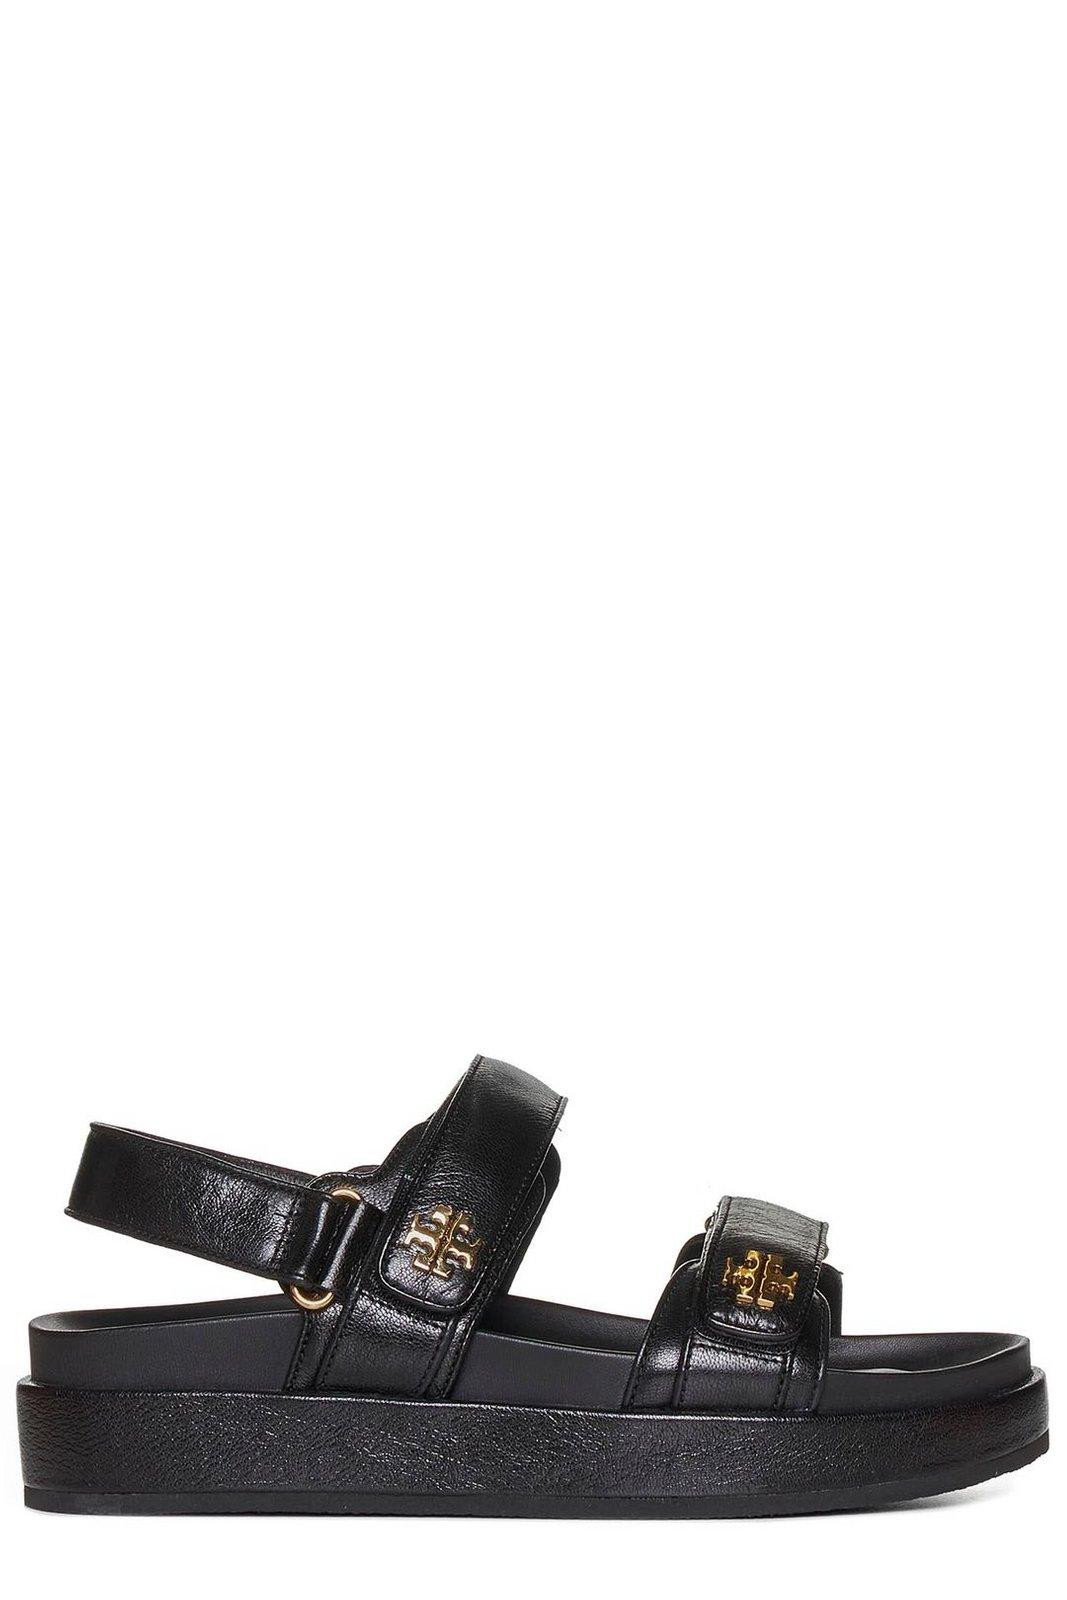 Shop Tory Burch Motif Logo Plaque Double Strapped Sandals In Black